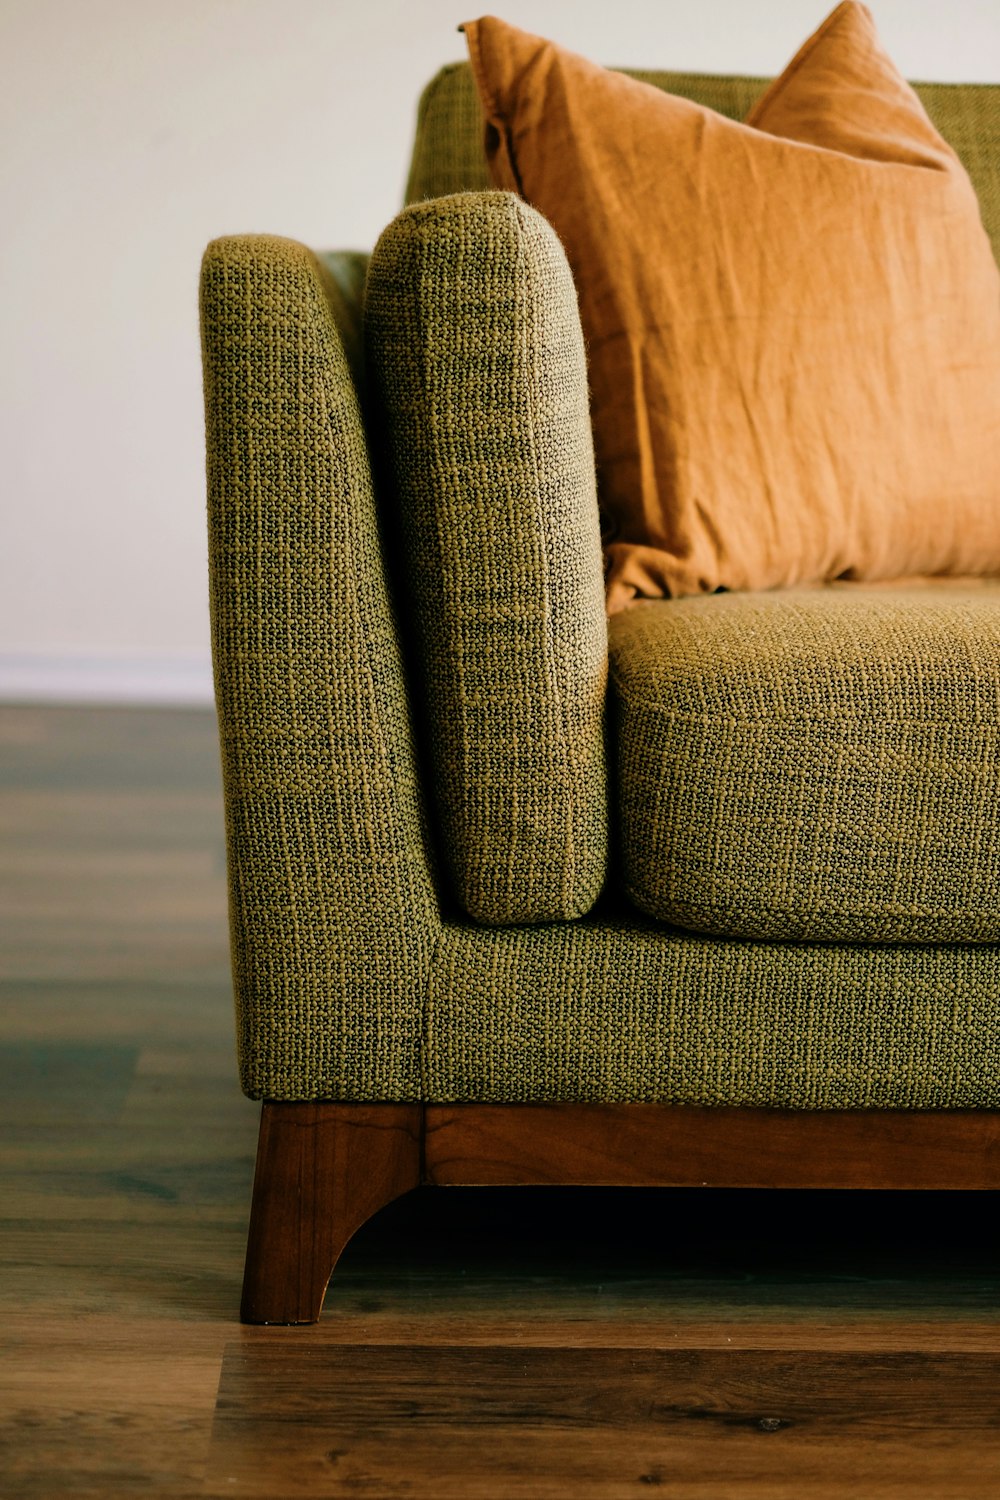 a close up of a couch with pillows on it